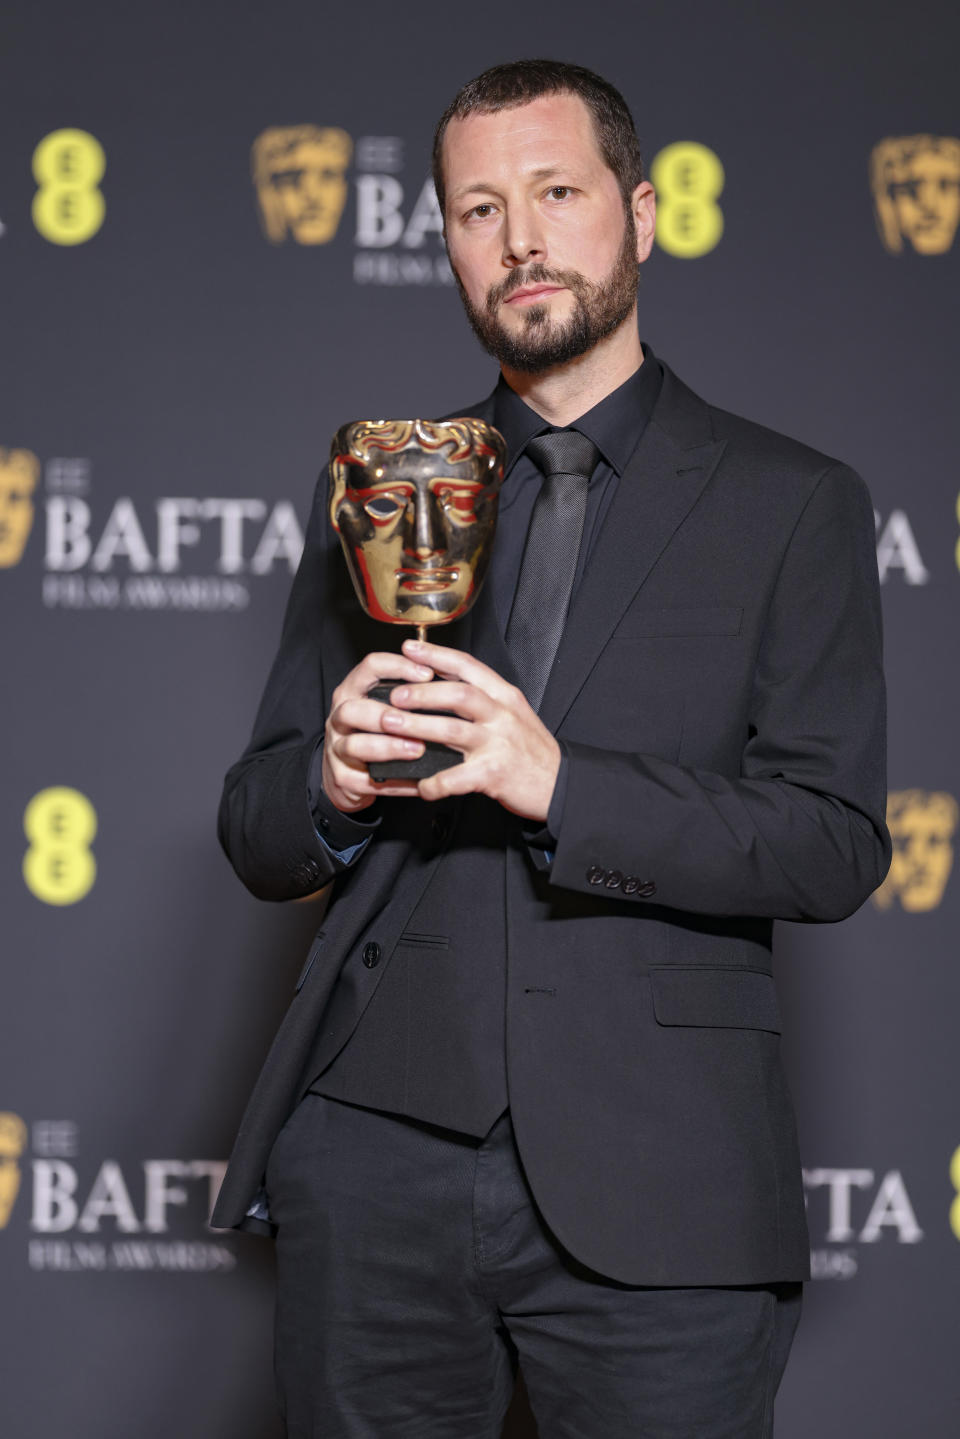 Director, producer and Associated Press journalist Mstyslav Chernov, winner of the documentary award for '20 Days in Mariupol', poses for photographers at the 77th British Academy Film Awards, BAFTA's, in London, Sunday, Feb. 18, 2024. (Photo by Vianney Le Caer/Invision/AP)